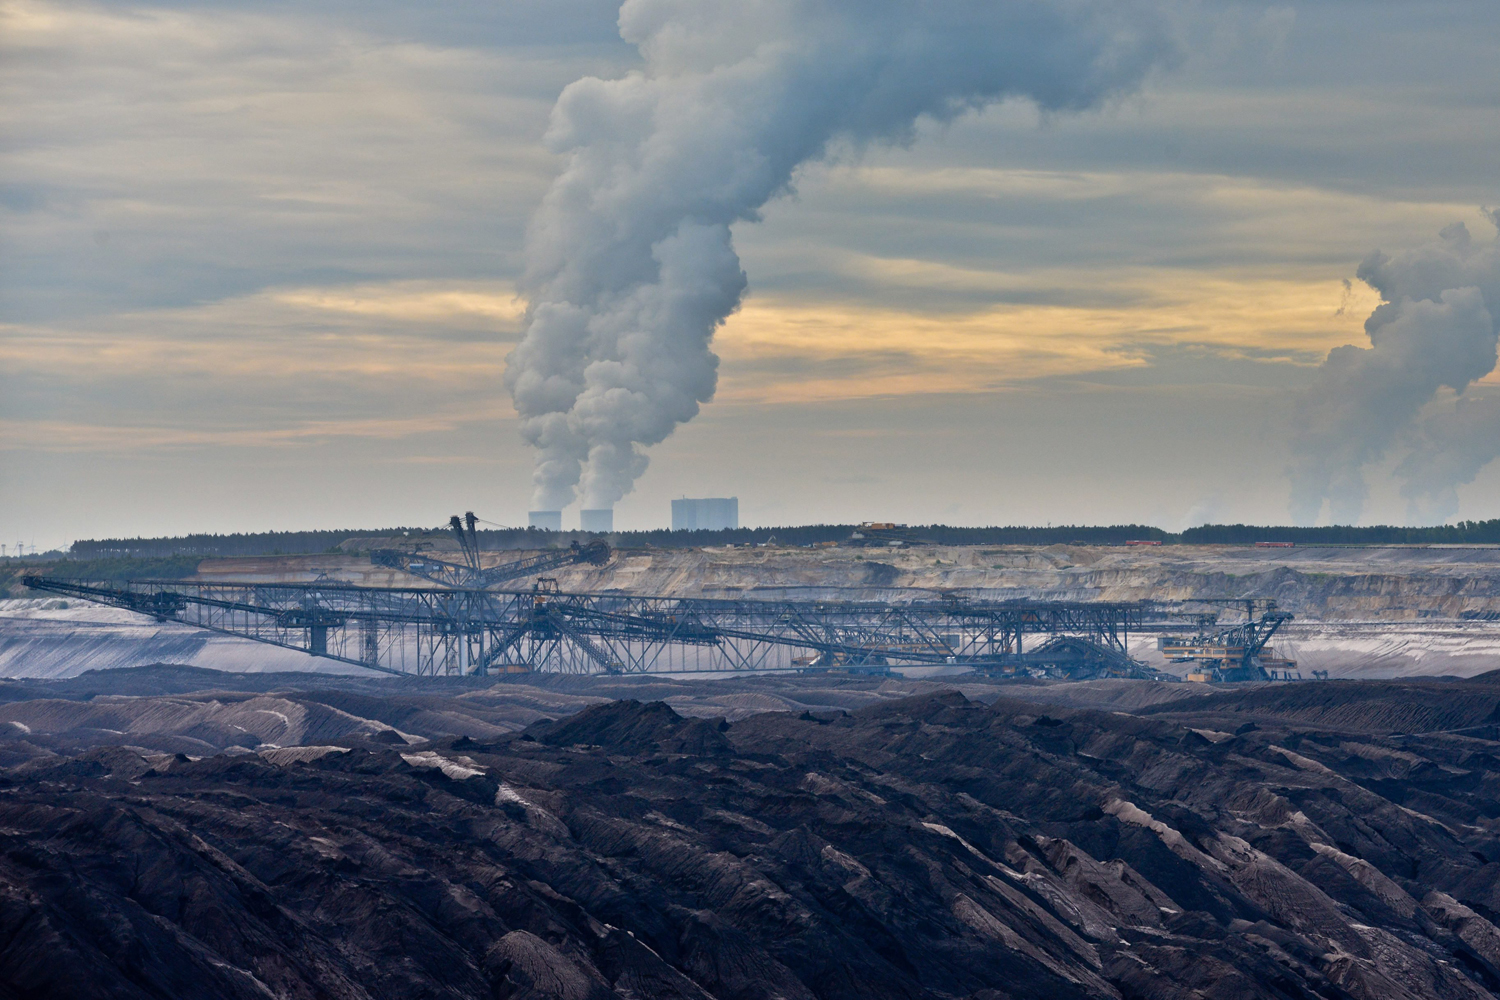 June 3, 2014. A view across the slag heaps of lignite surface mine Welzow of the Vattenfall AG in Welzow, Germany.